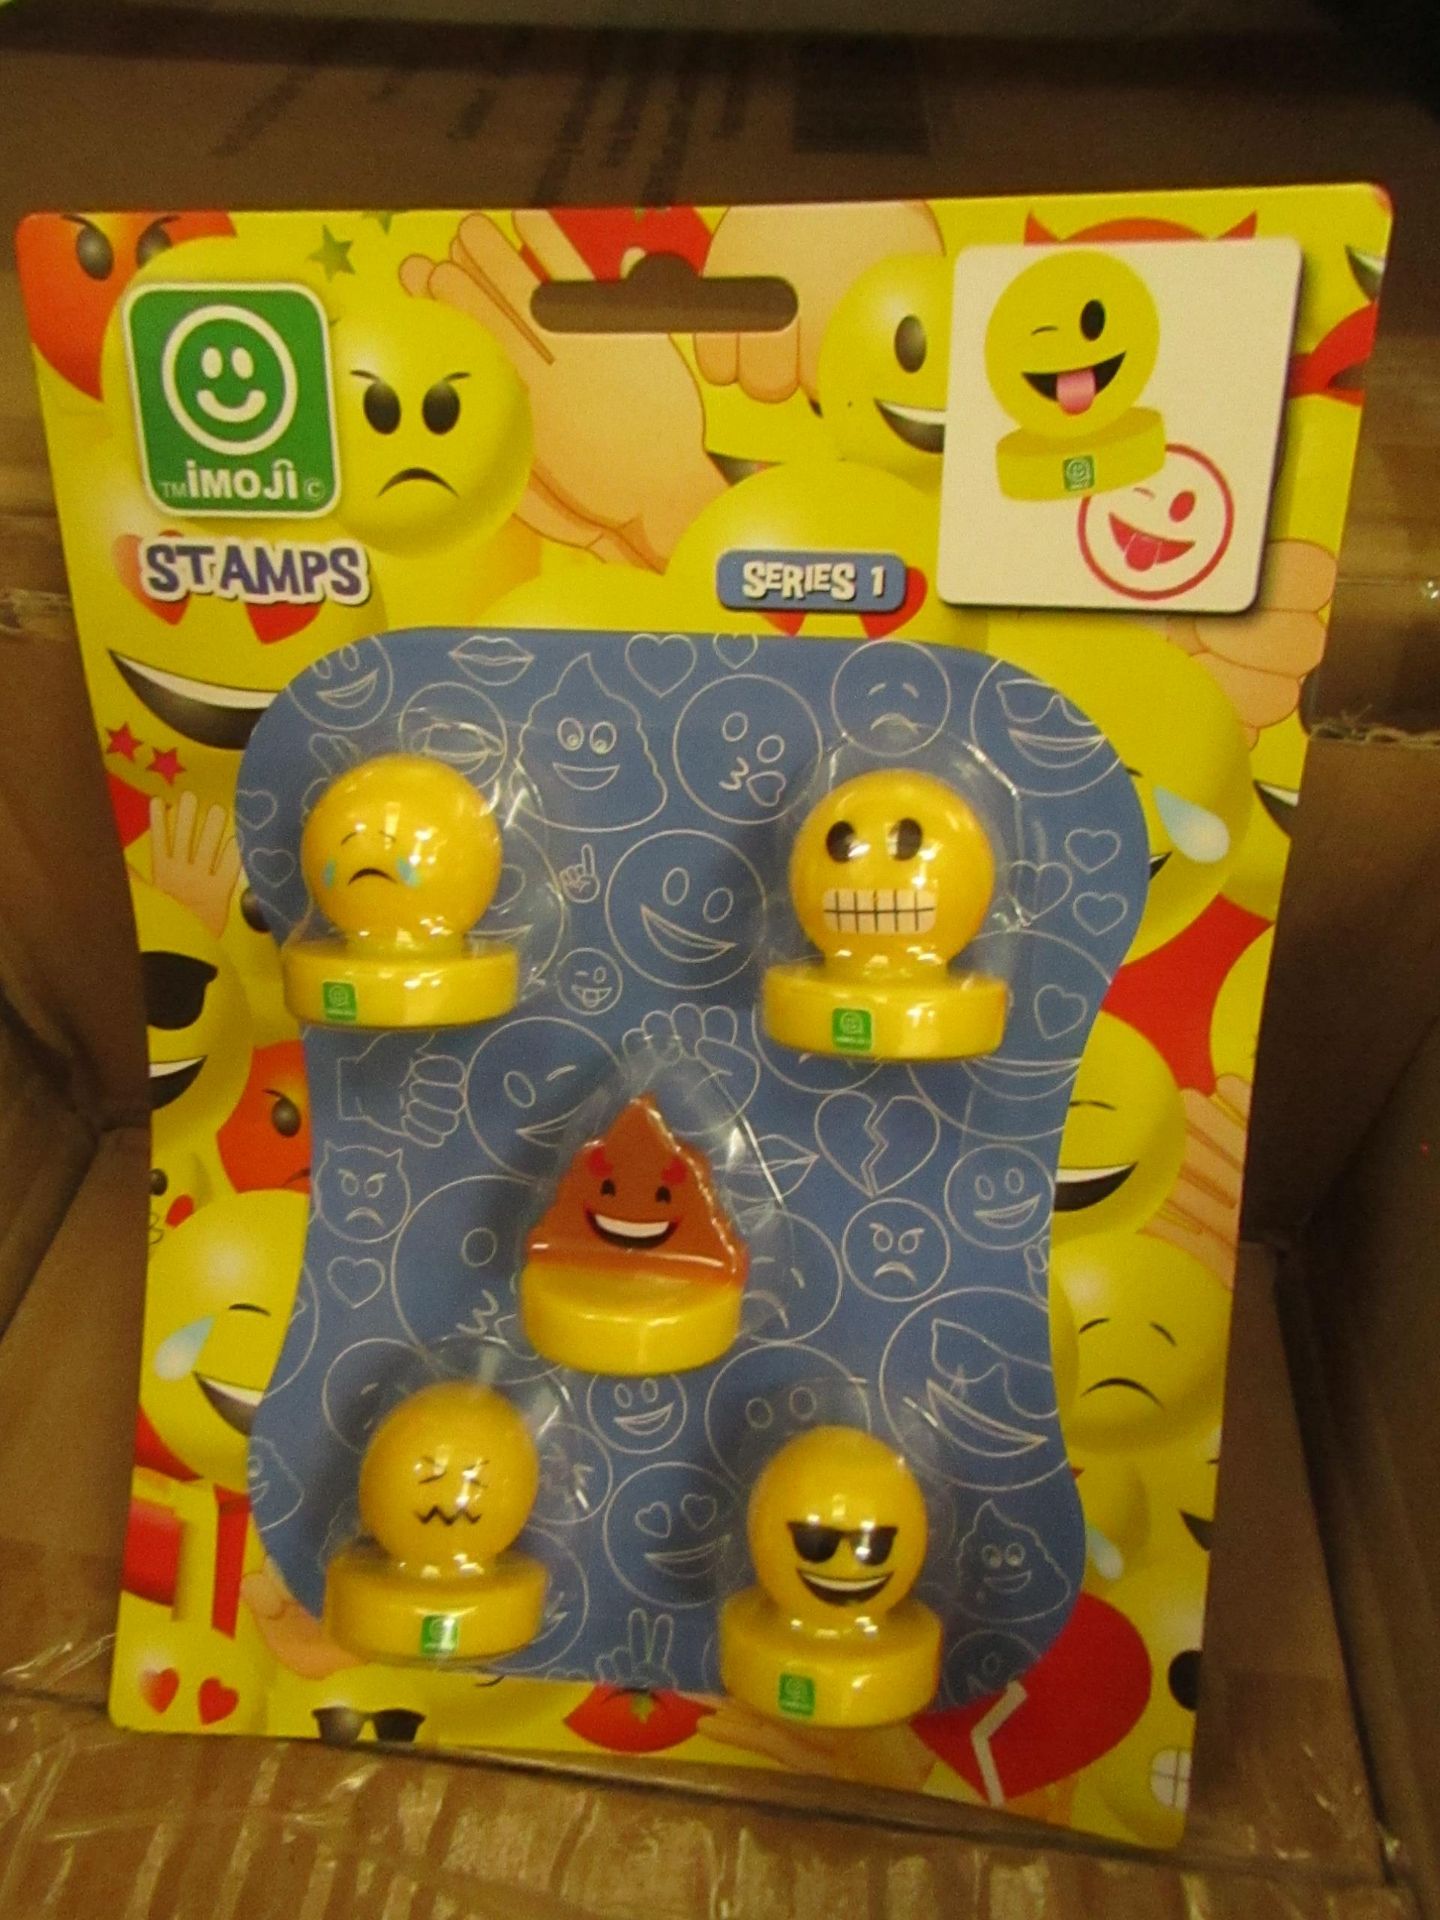 6x Imoji - 5 Pc Emoji Stamps Collection - New & Packaged.